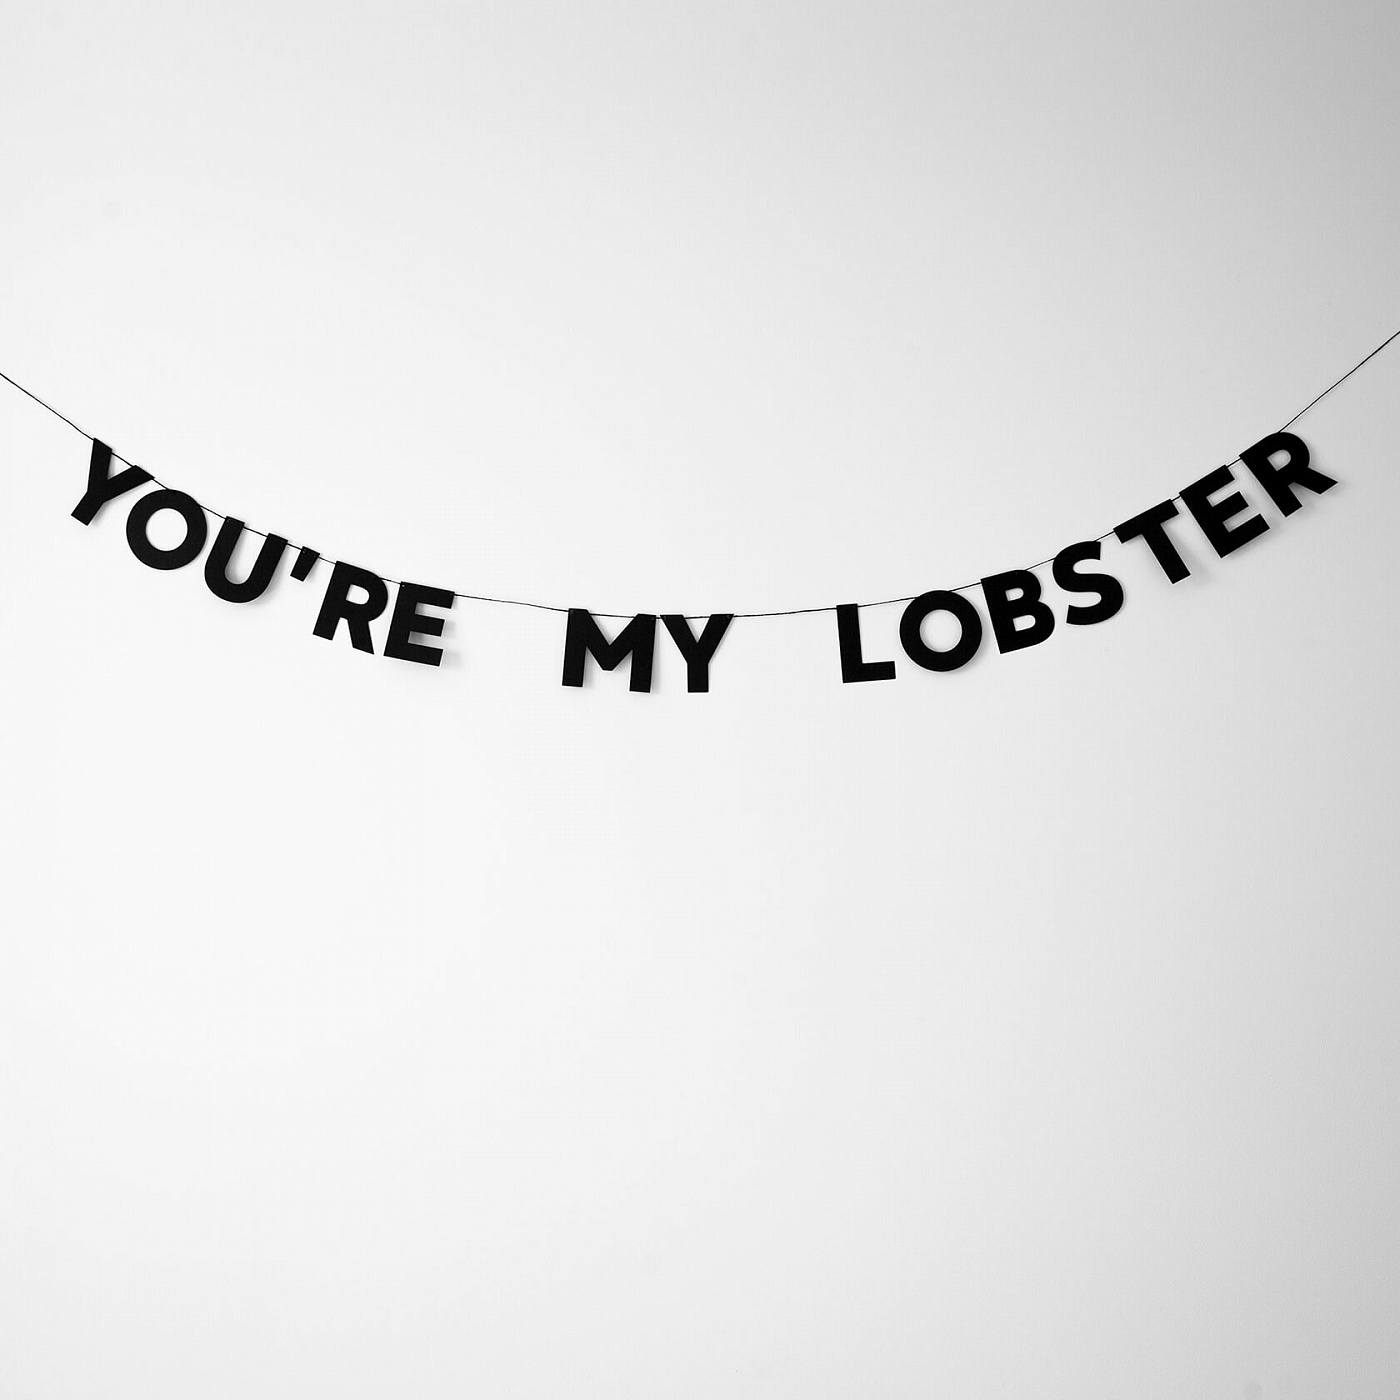  YOURE MY LOBSTER